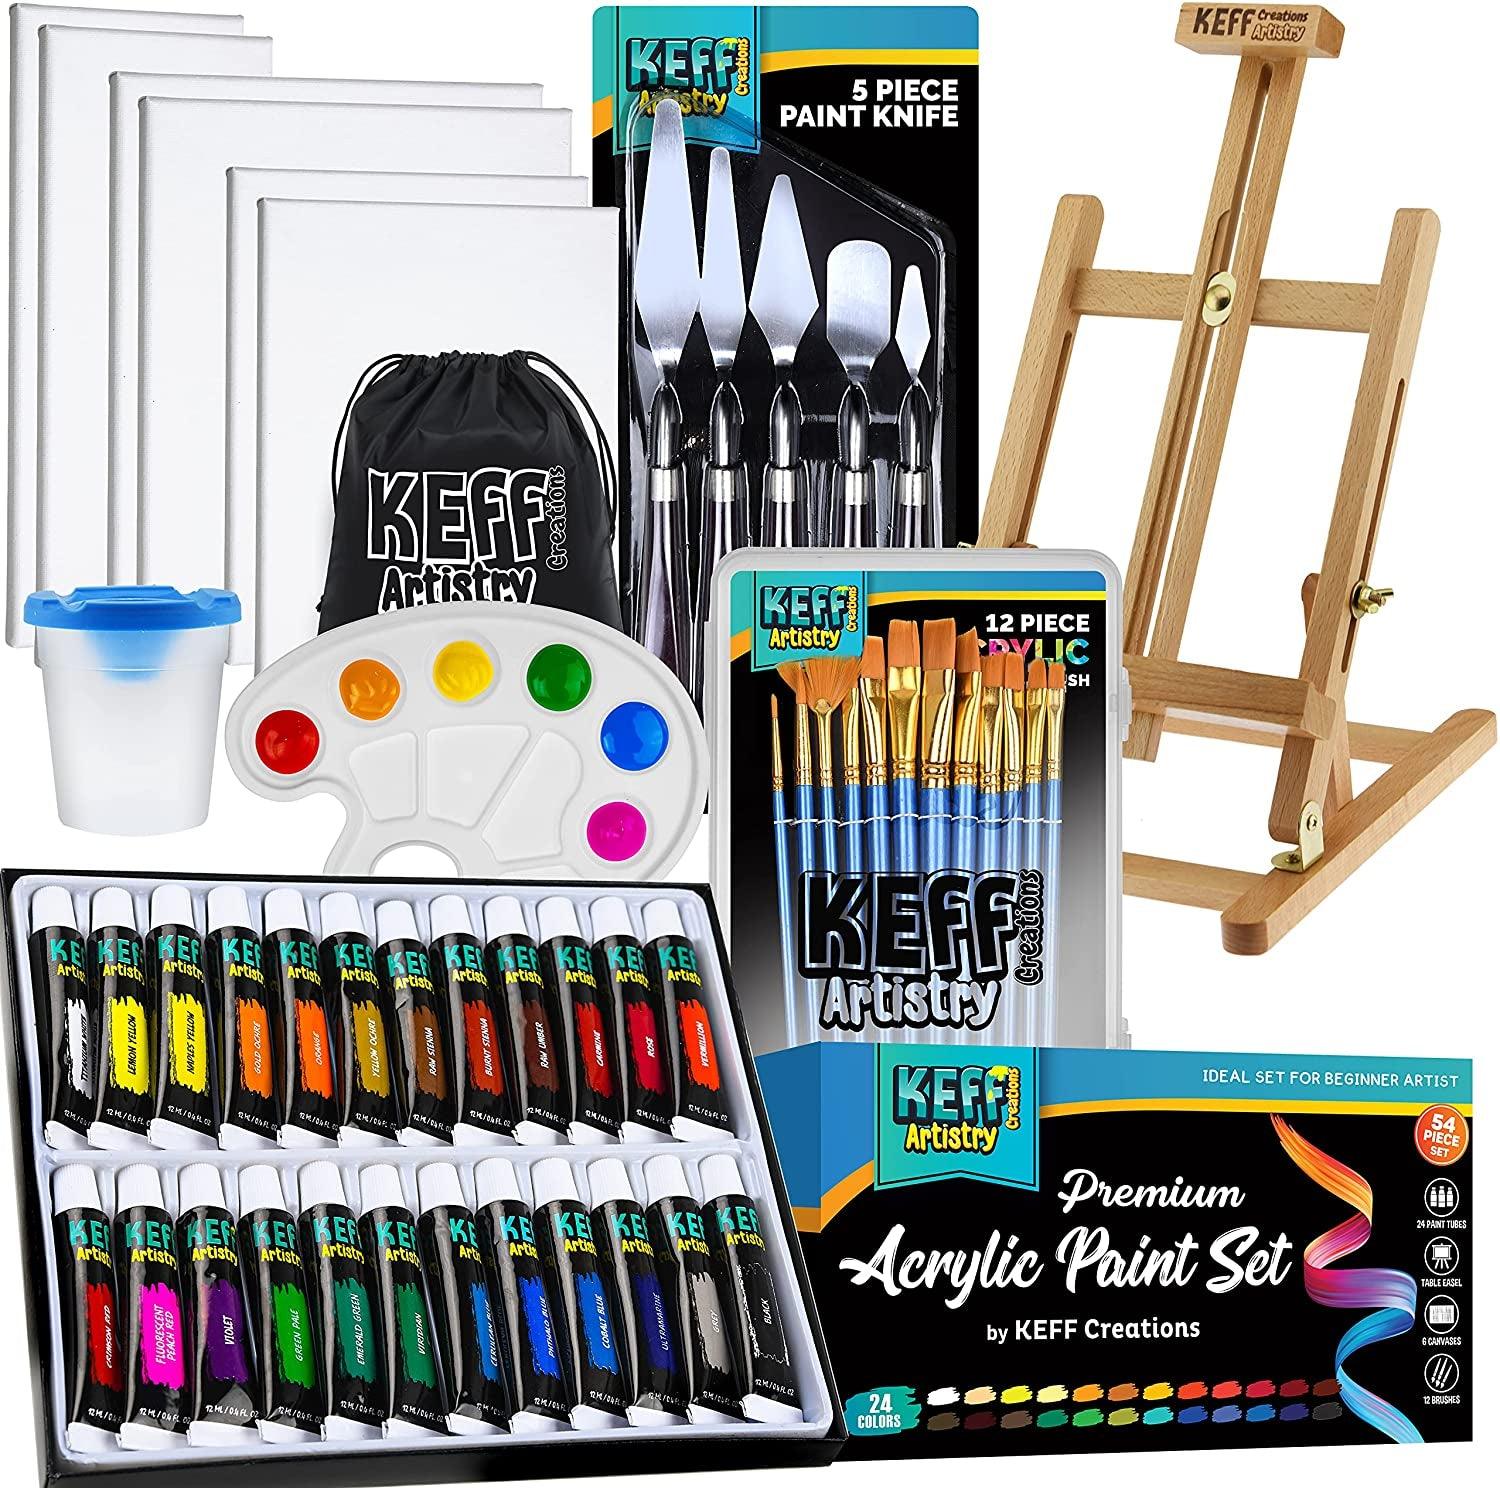 Acrylic Paint Set for Adults Art Painting Supplies Kit With Tabletop Easel,  Brushes, Canvas, Acrylic, Palette, Paint Knives 